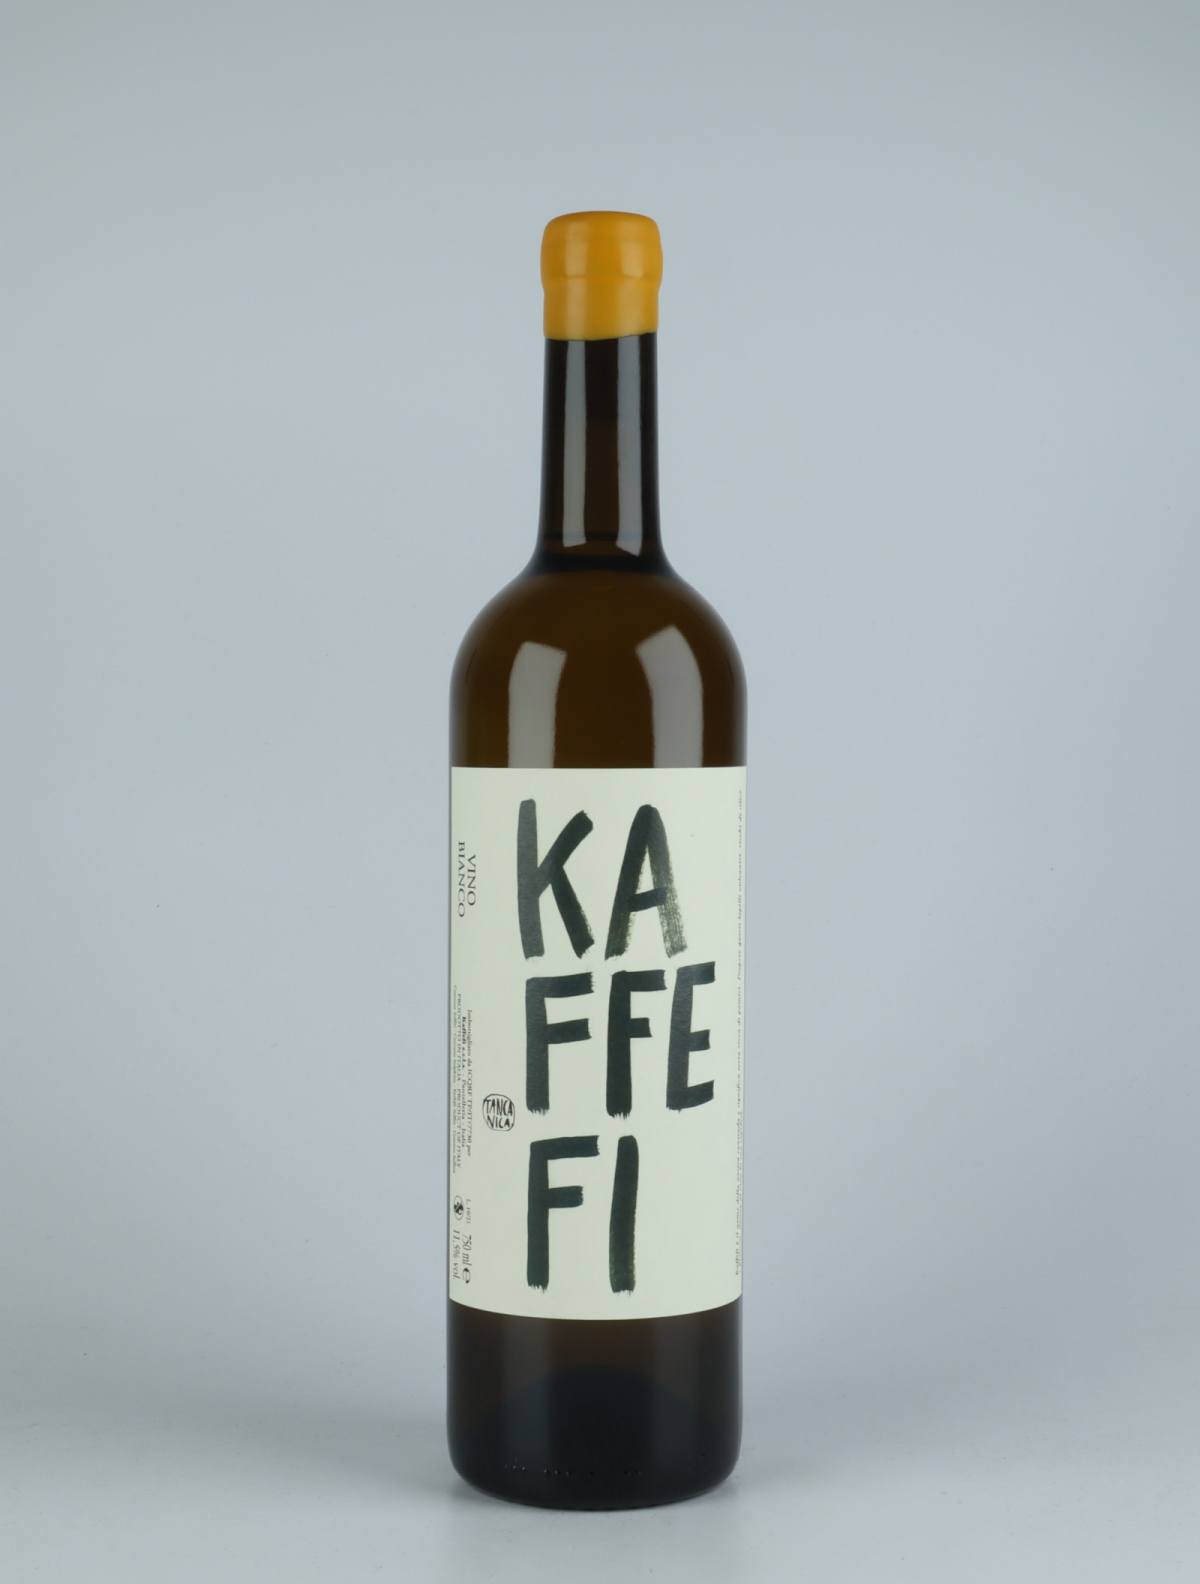 A bottle 2020 Kaffefi White wine from Tanca Nica, Sicily in Italy